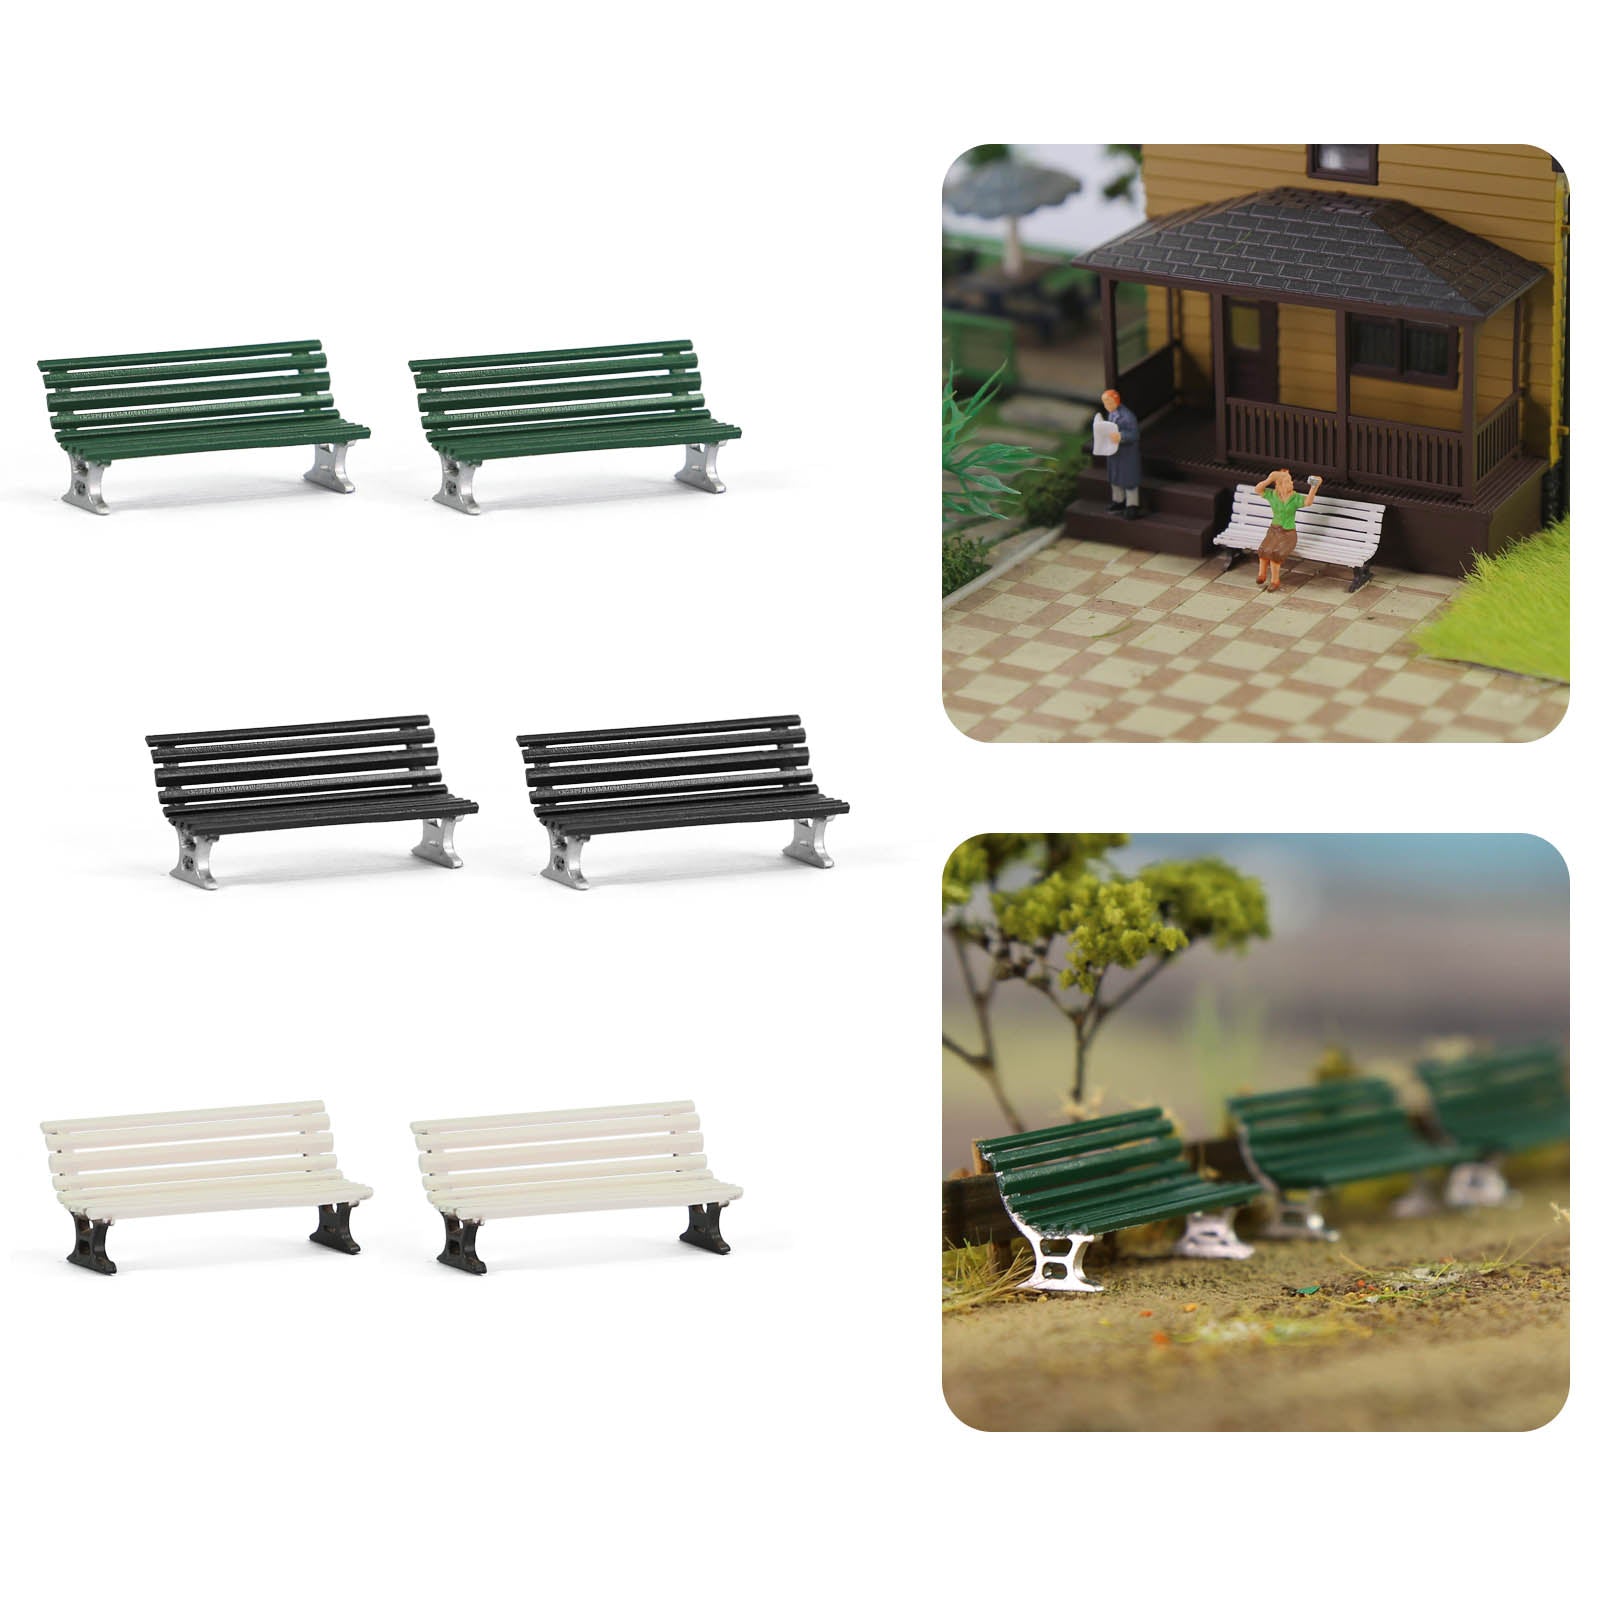 ZY38087 12pcs HO Scale 1:87 Model  Park Garden Benches Street Station Seat Chairs